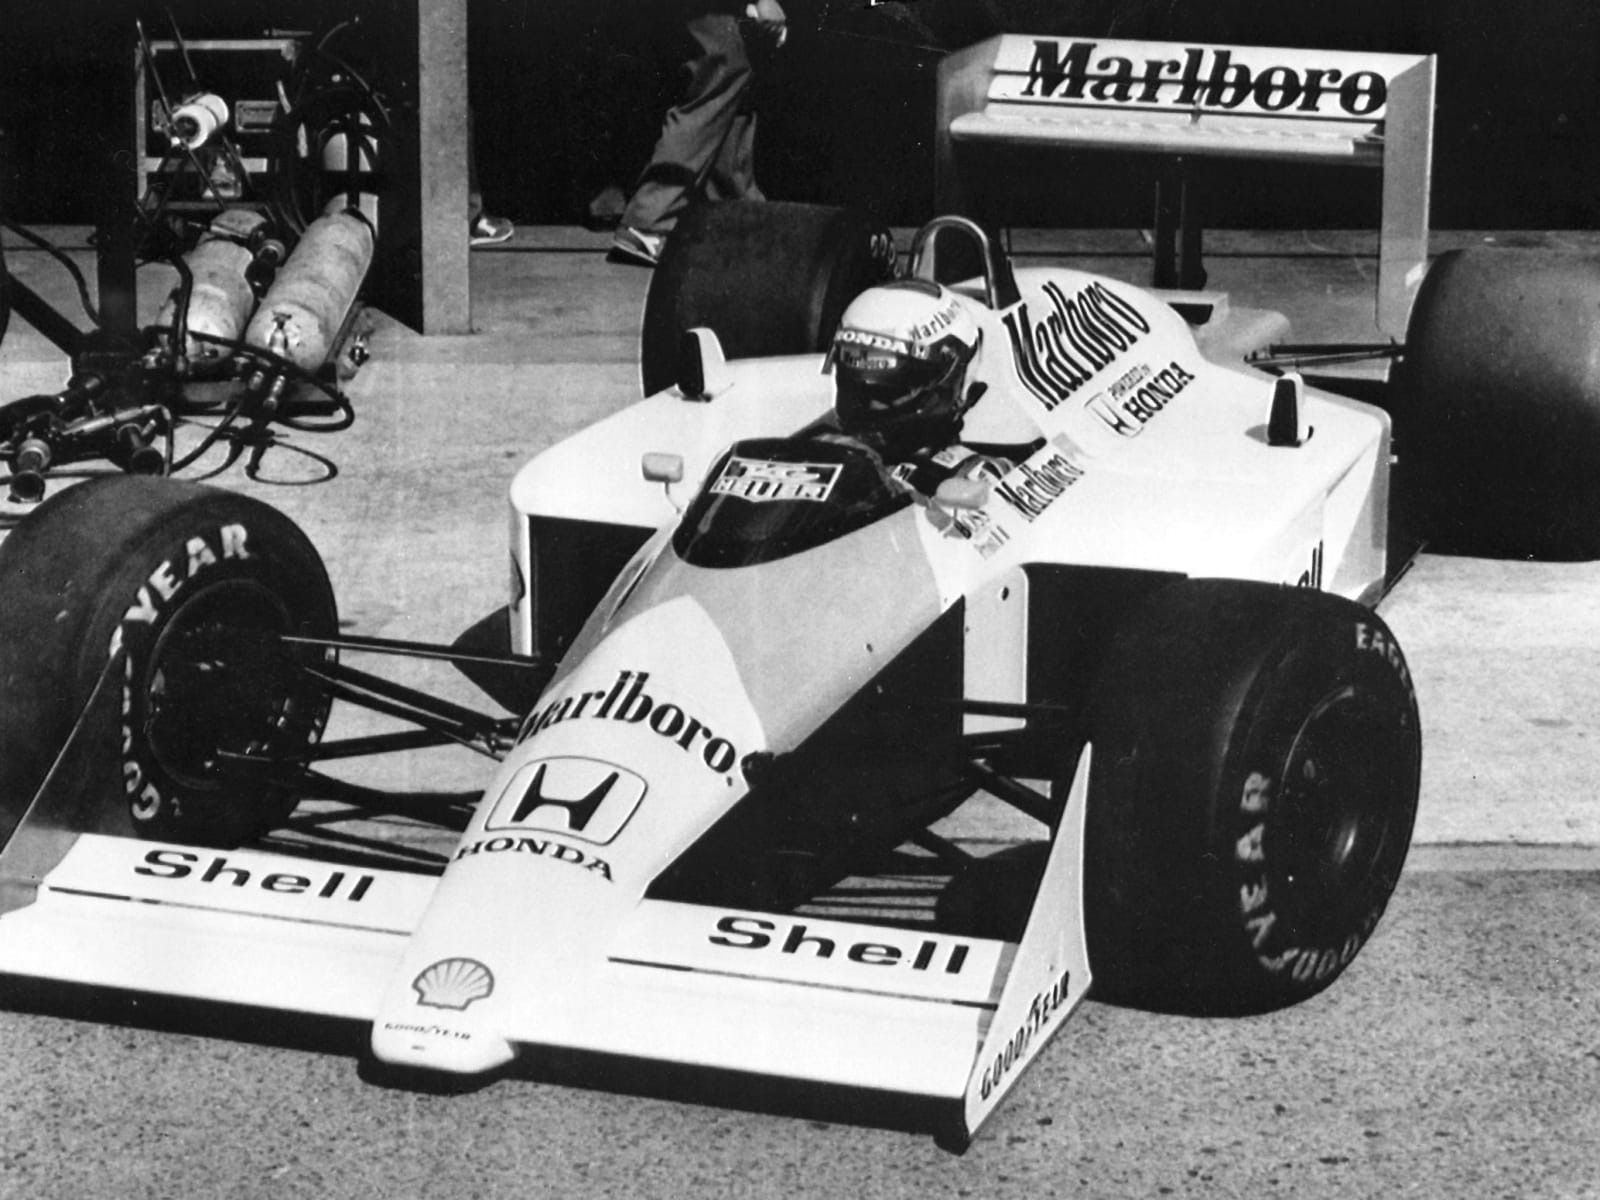 First outing of Senna's new McLaren on test at Imola circuit in 1988. 